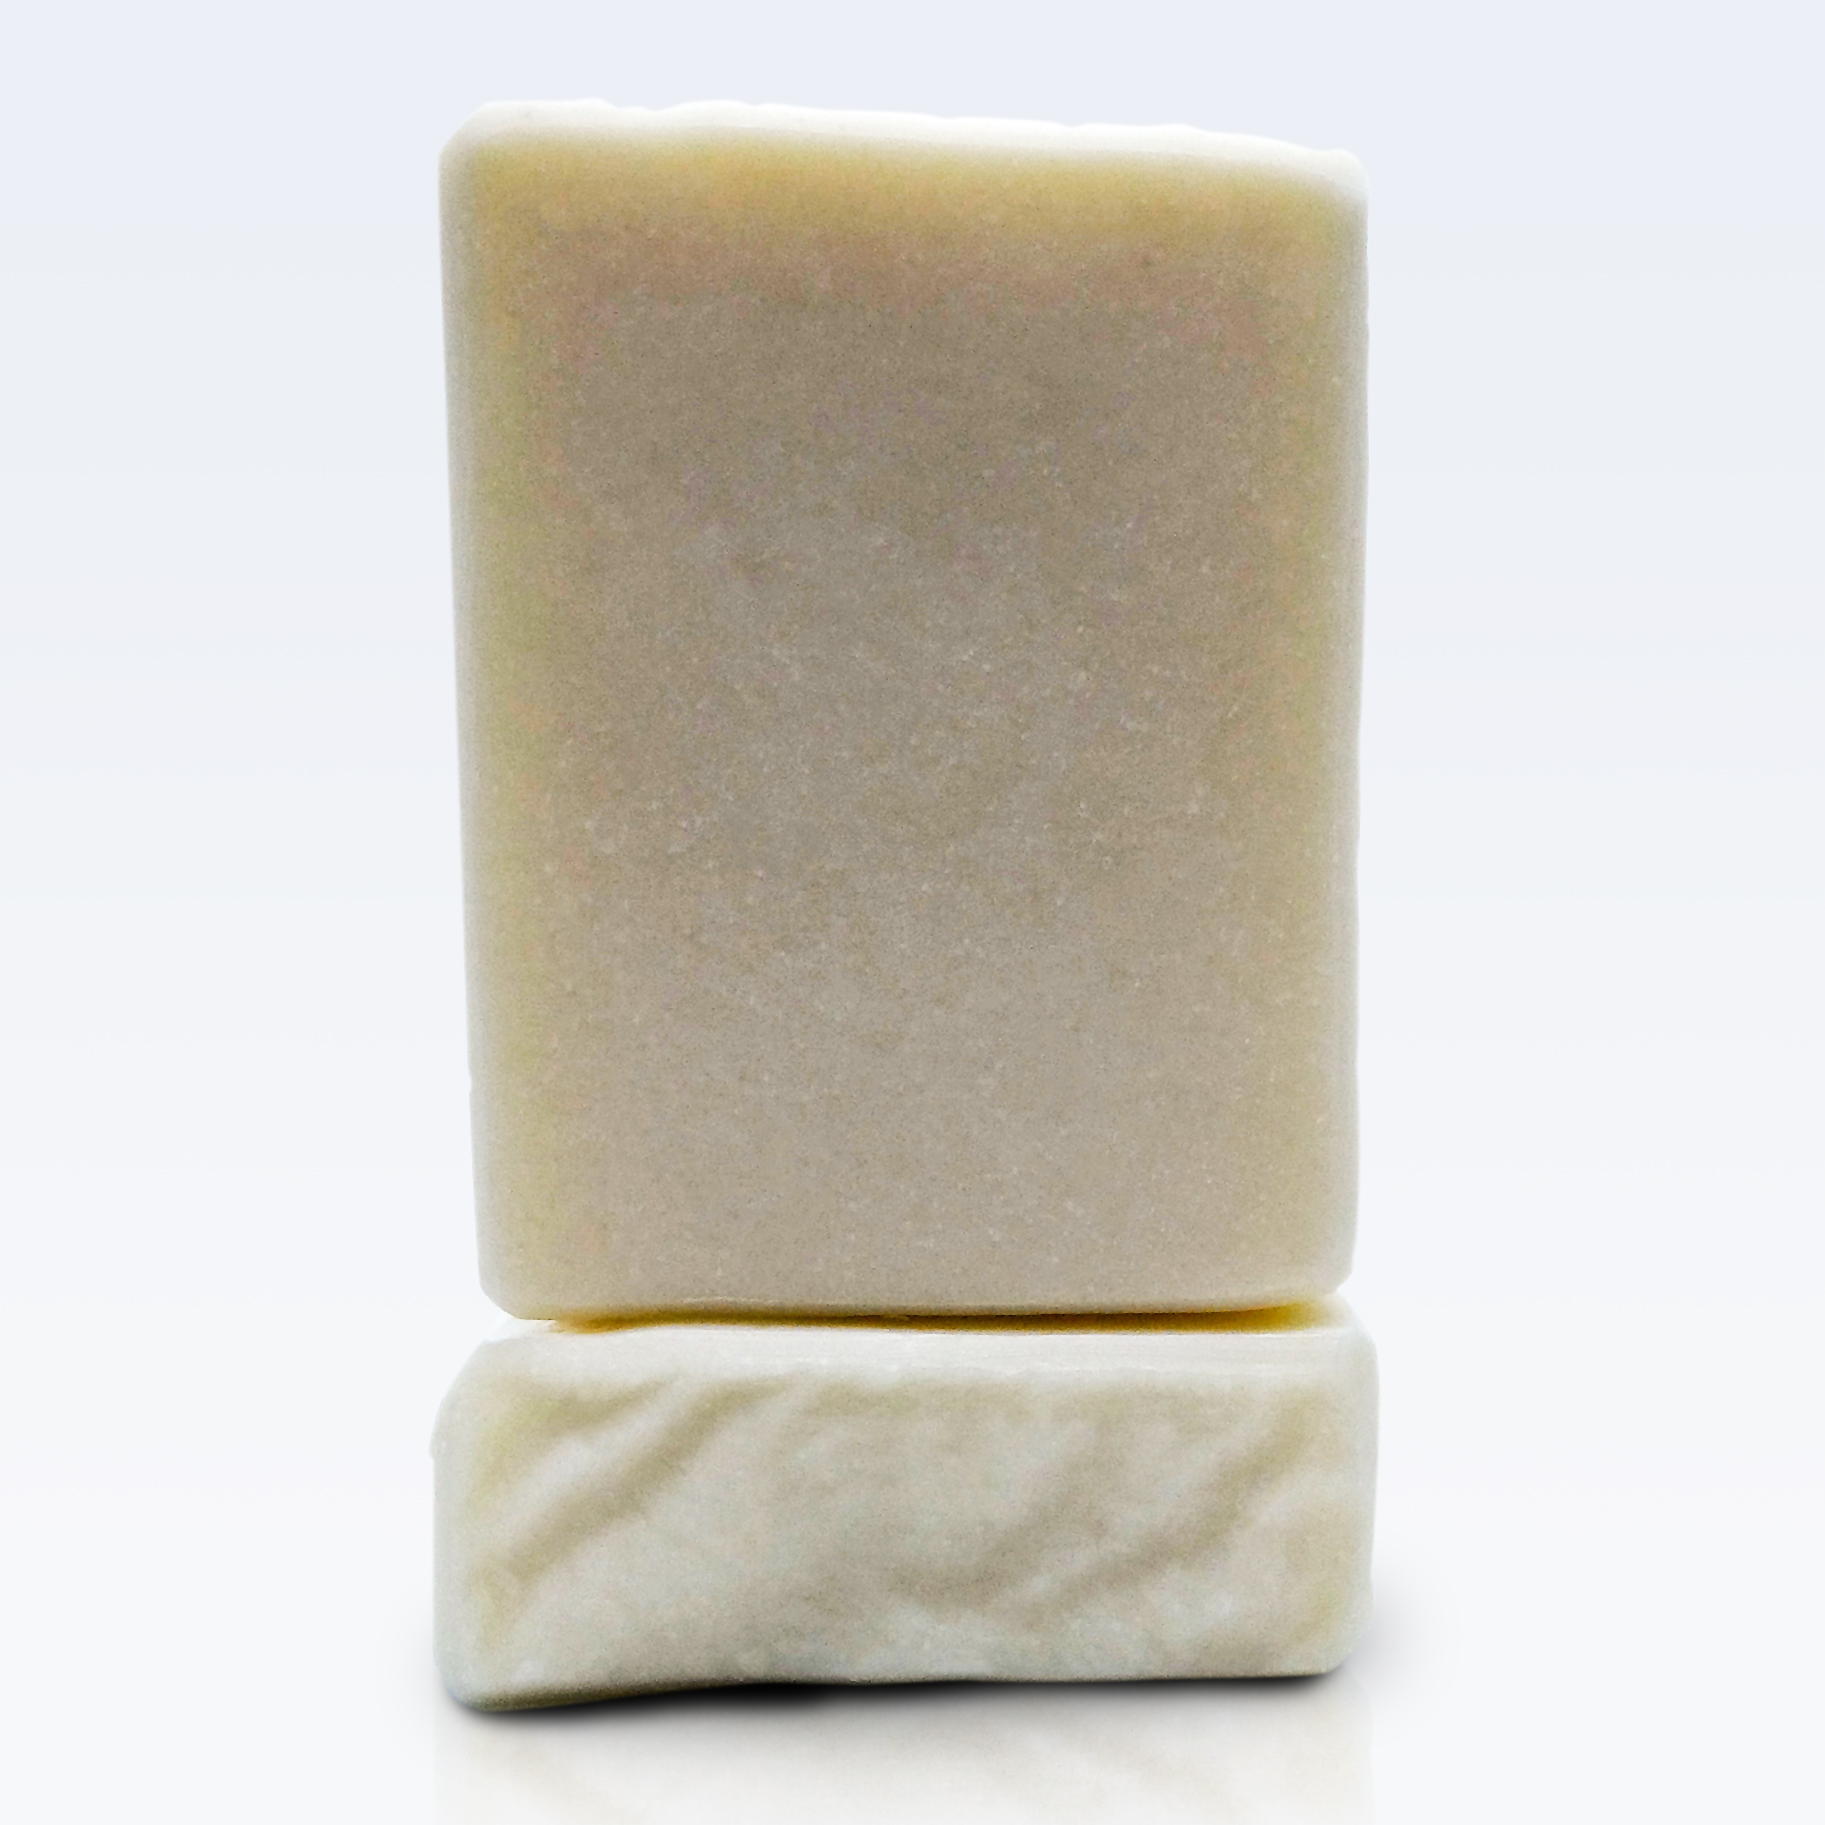 Naked handmade soap by Tubby Tabby Soaps (unscented, no added colour, natural gentle soap)